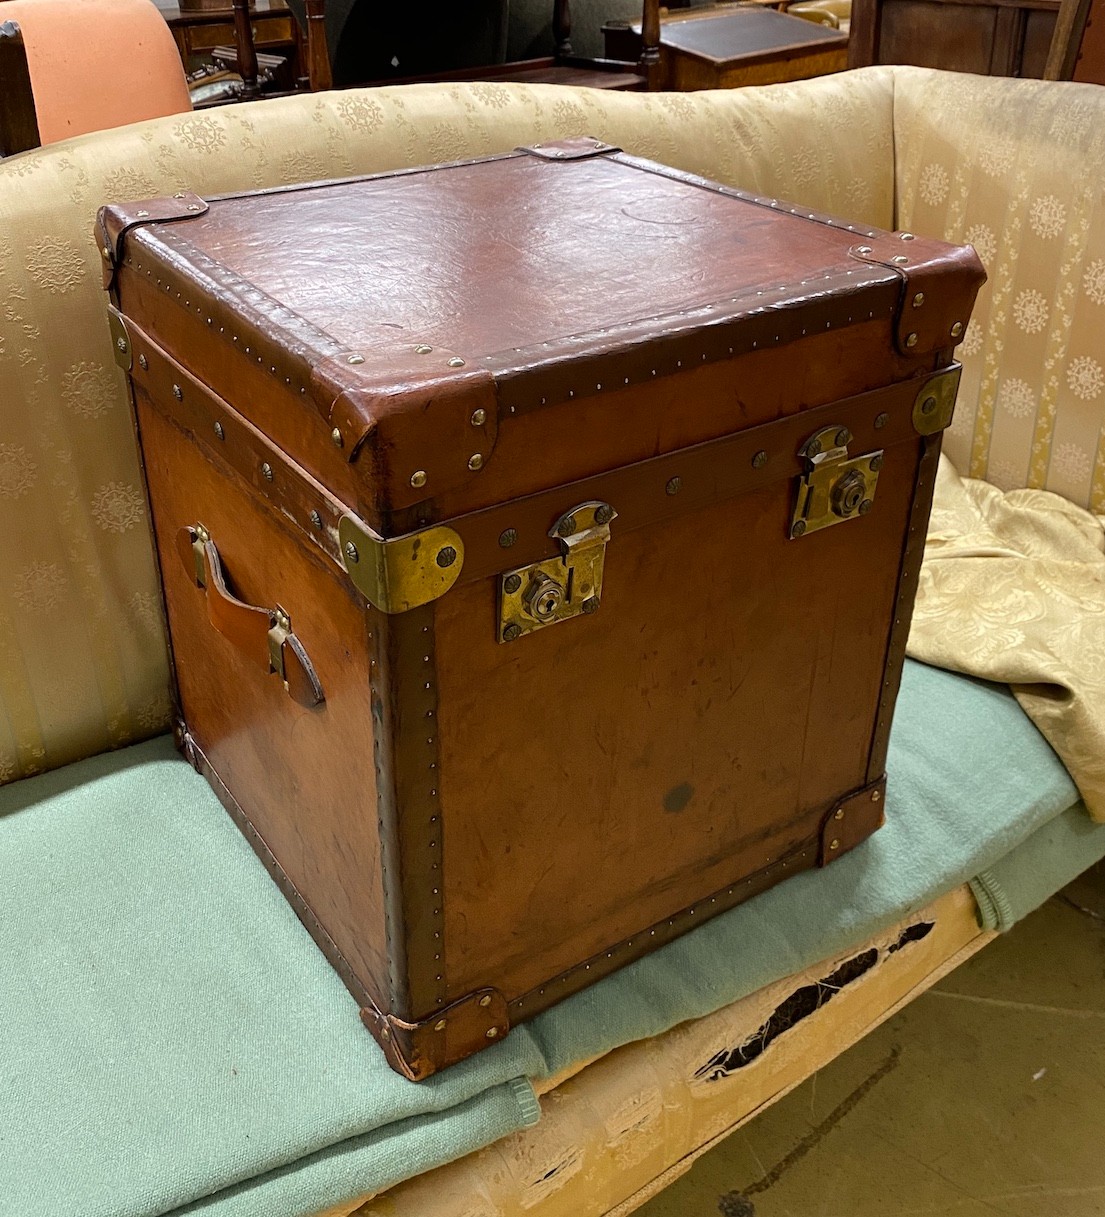 A Victorian style brass mounted tan leather trunk, length 47cm, depth 46cm, height 50cm